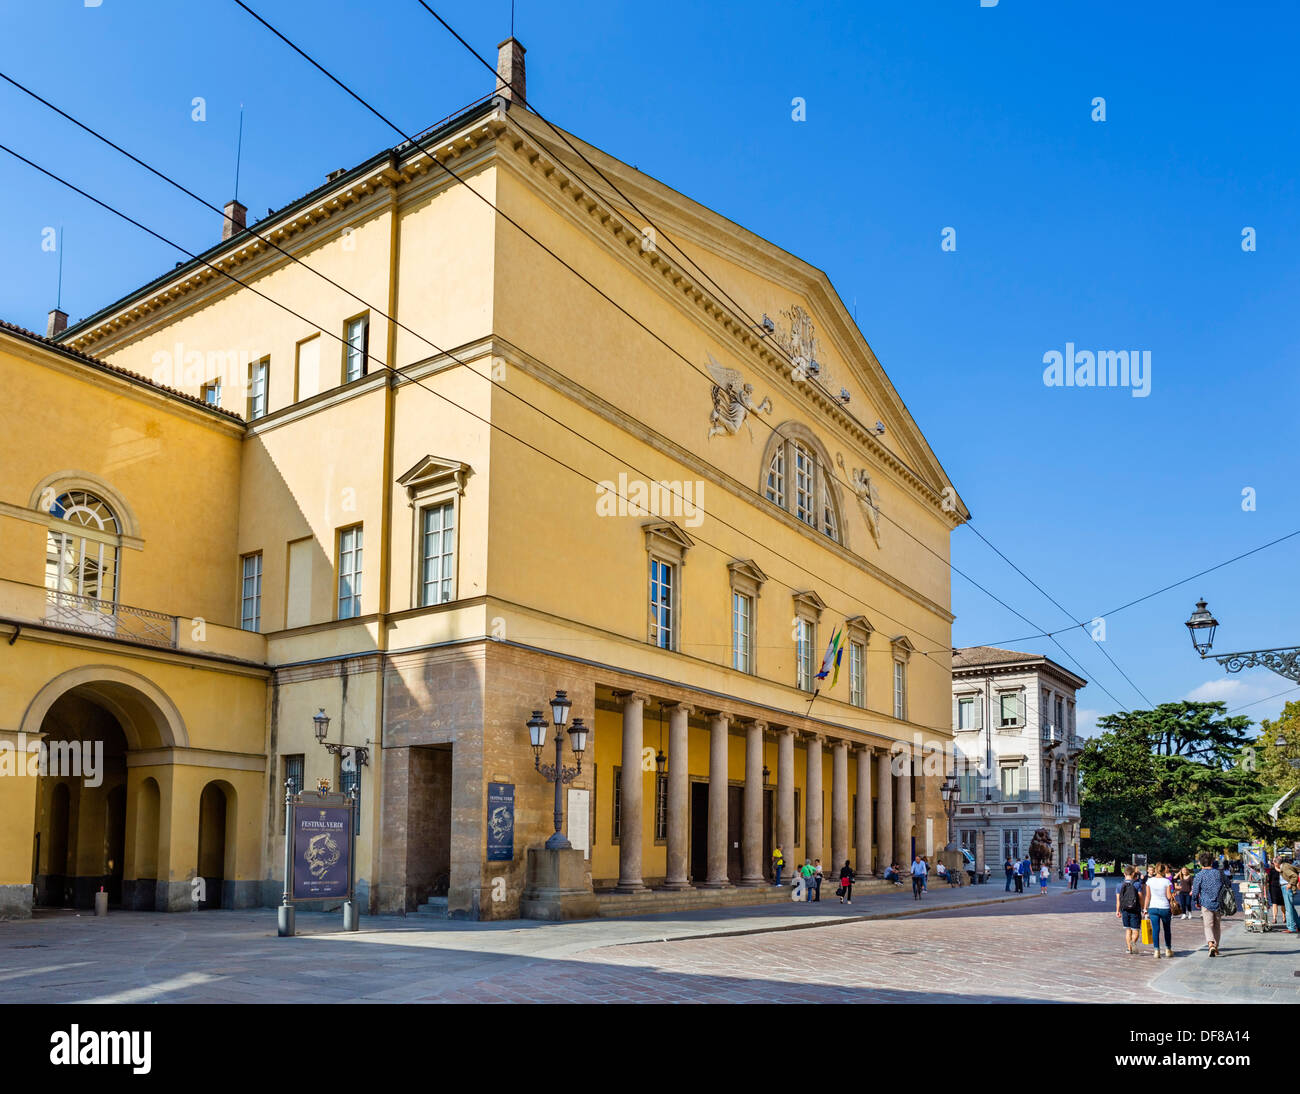 Teatro Regio Parma High Resolution Stock Photography and Images - Alamy